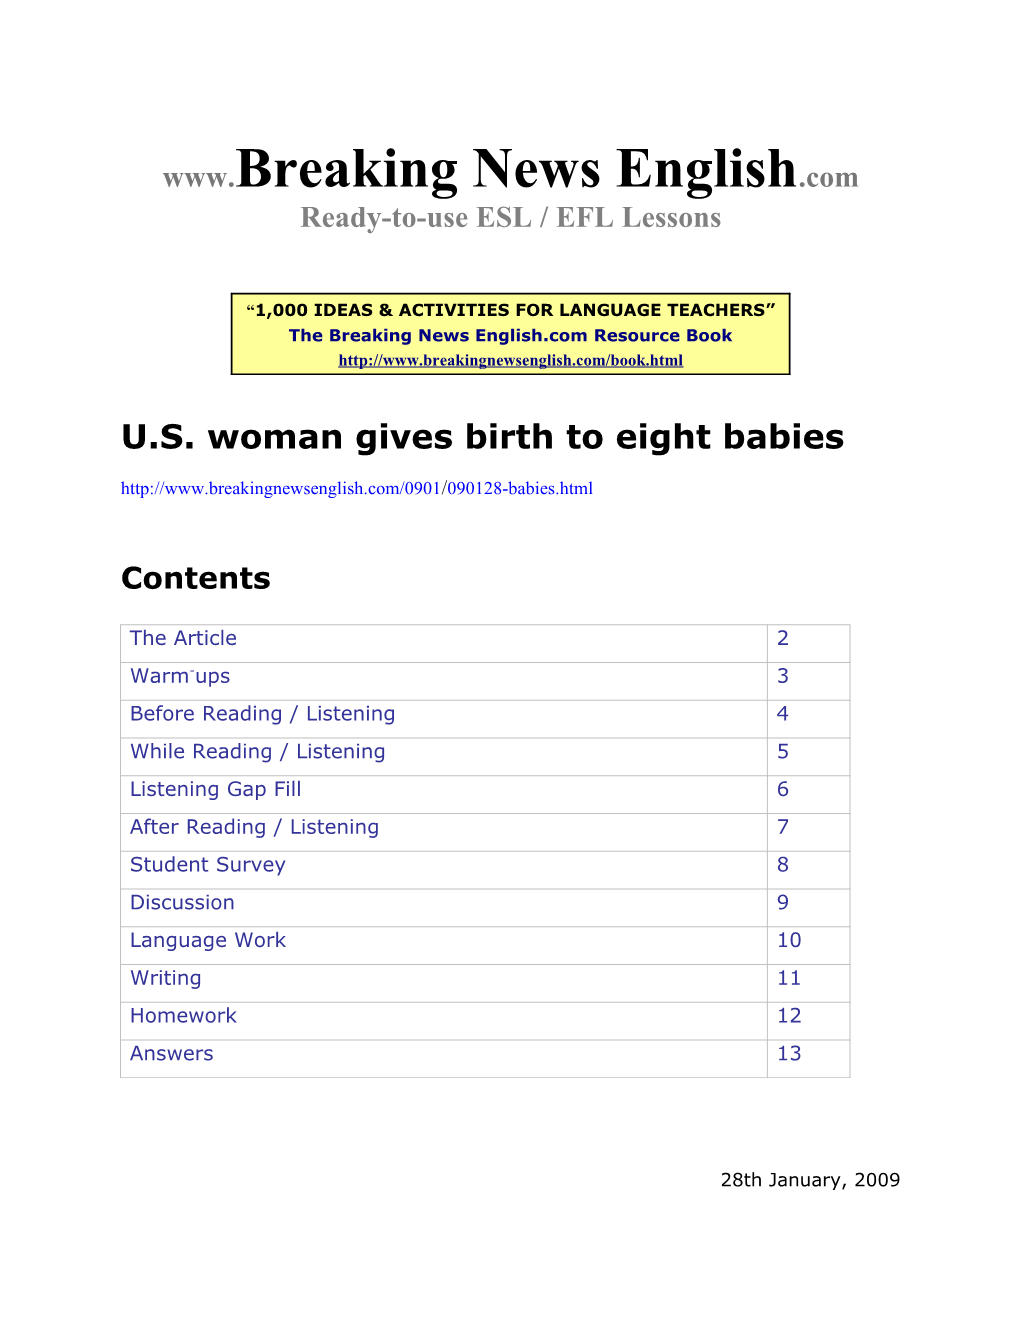 ESL Lesson: U.S. Woman Gives Birth to Eight Babies